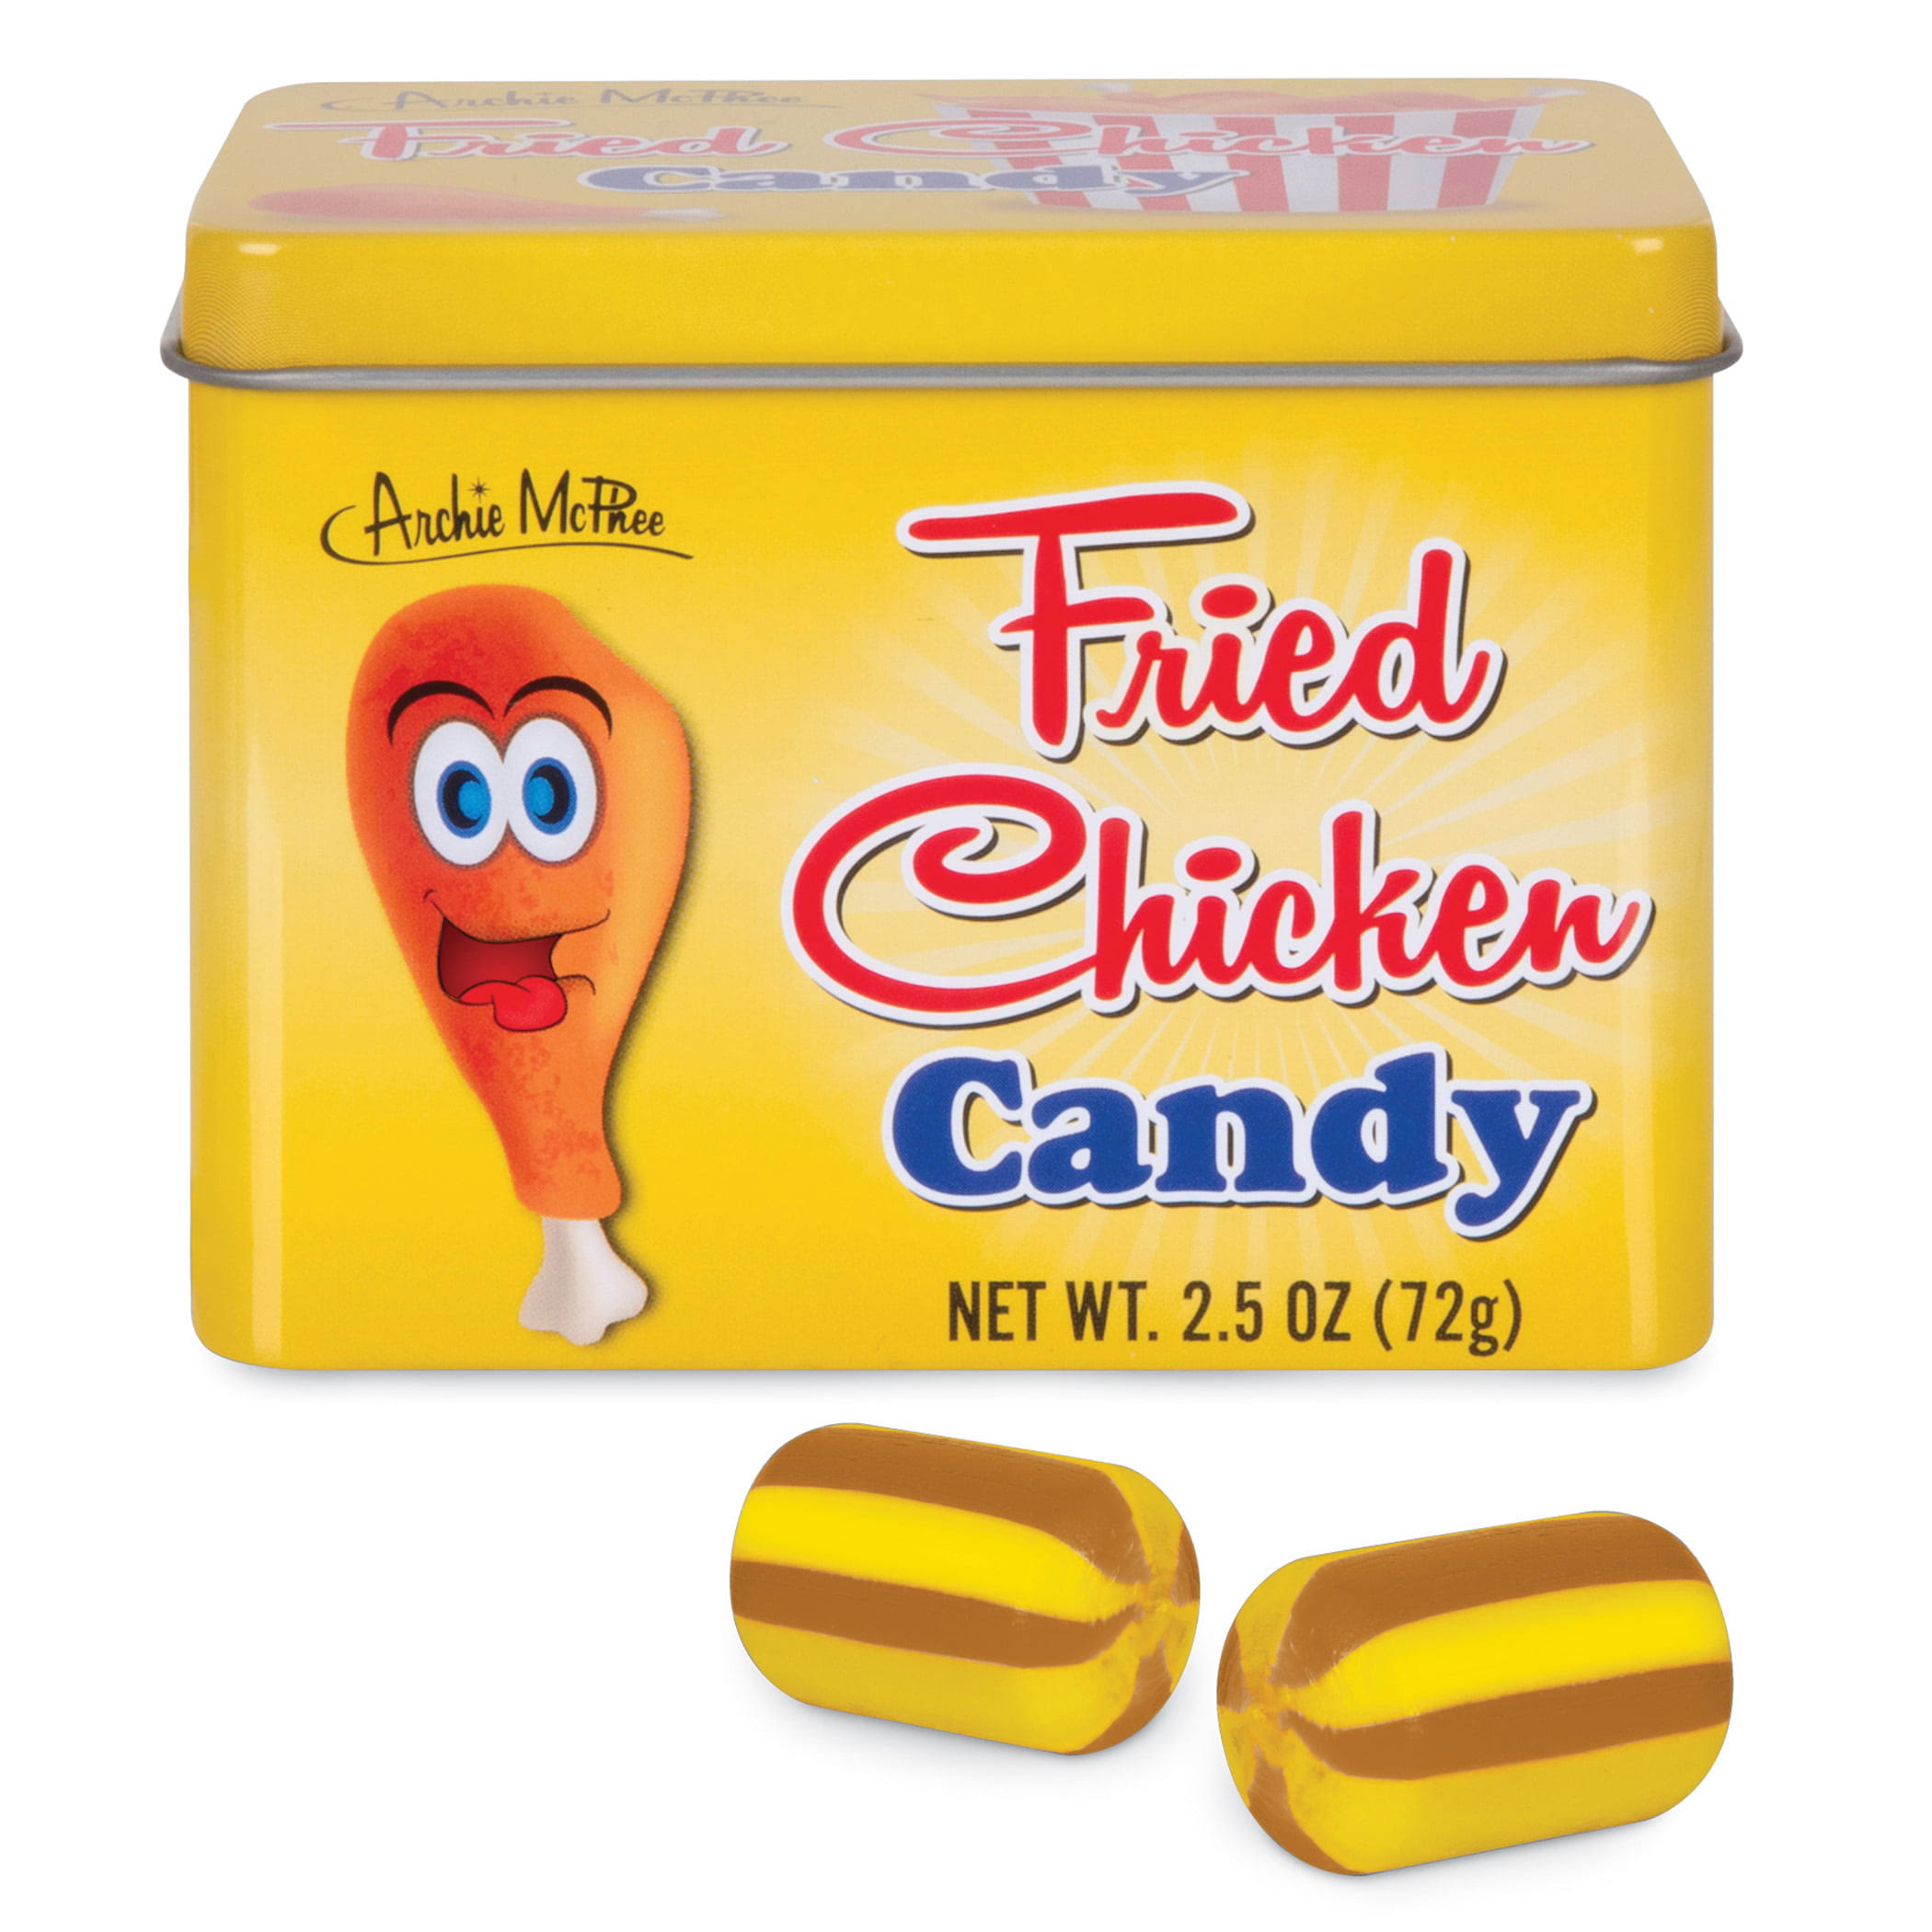 Archie McPhee - Fried Chicken Candy